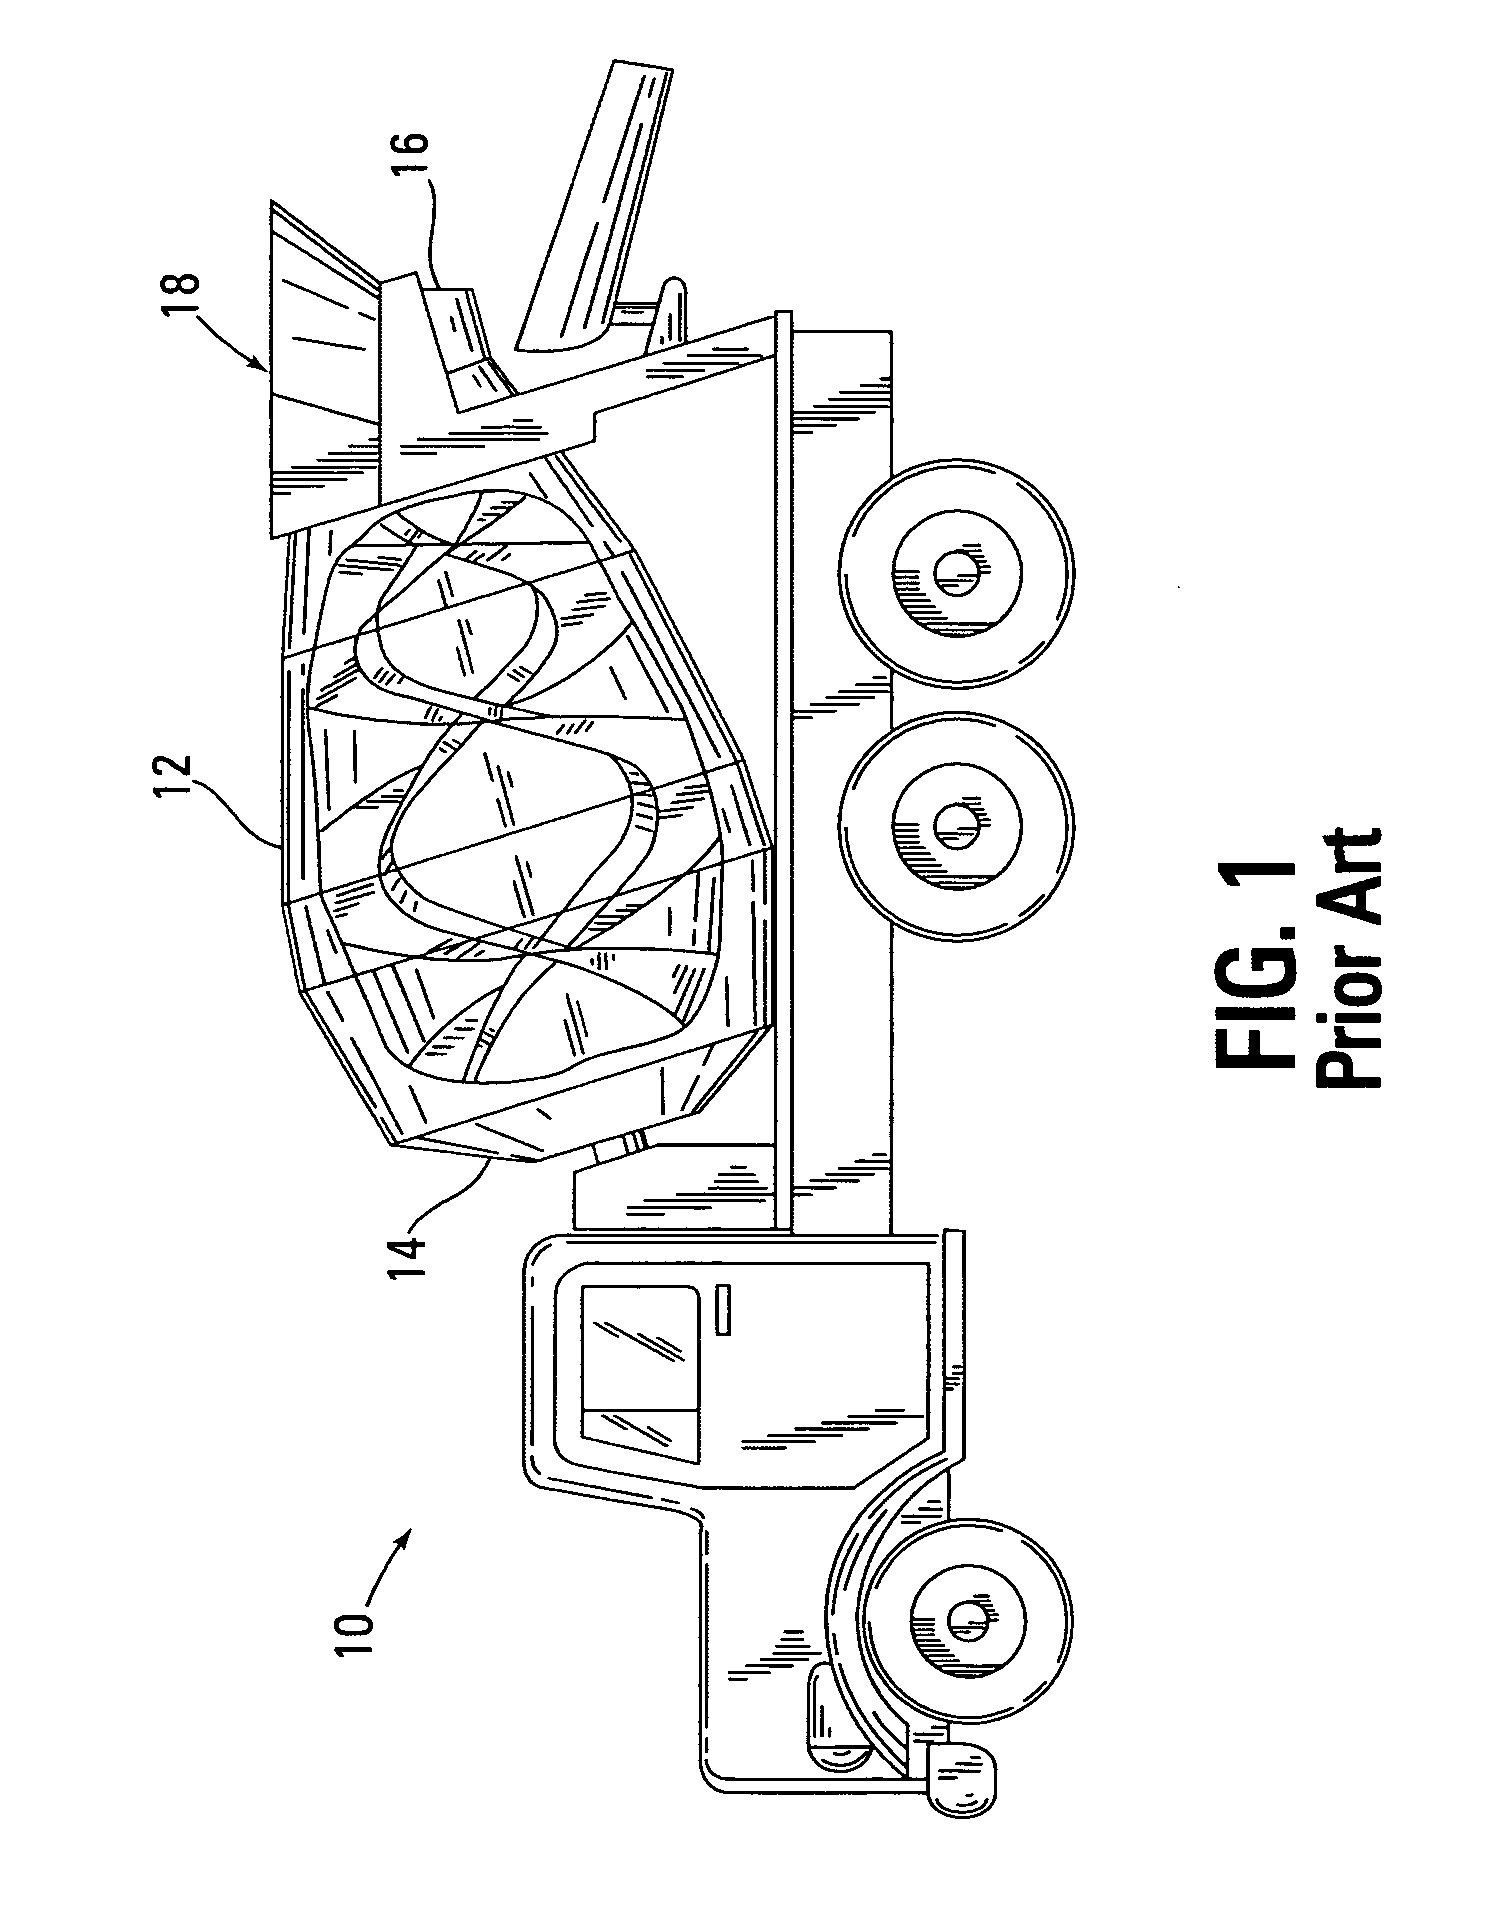 Mechanism for removing concrete accretions from mixing drum